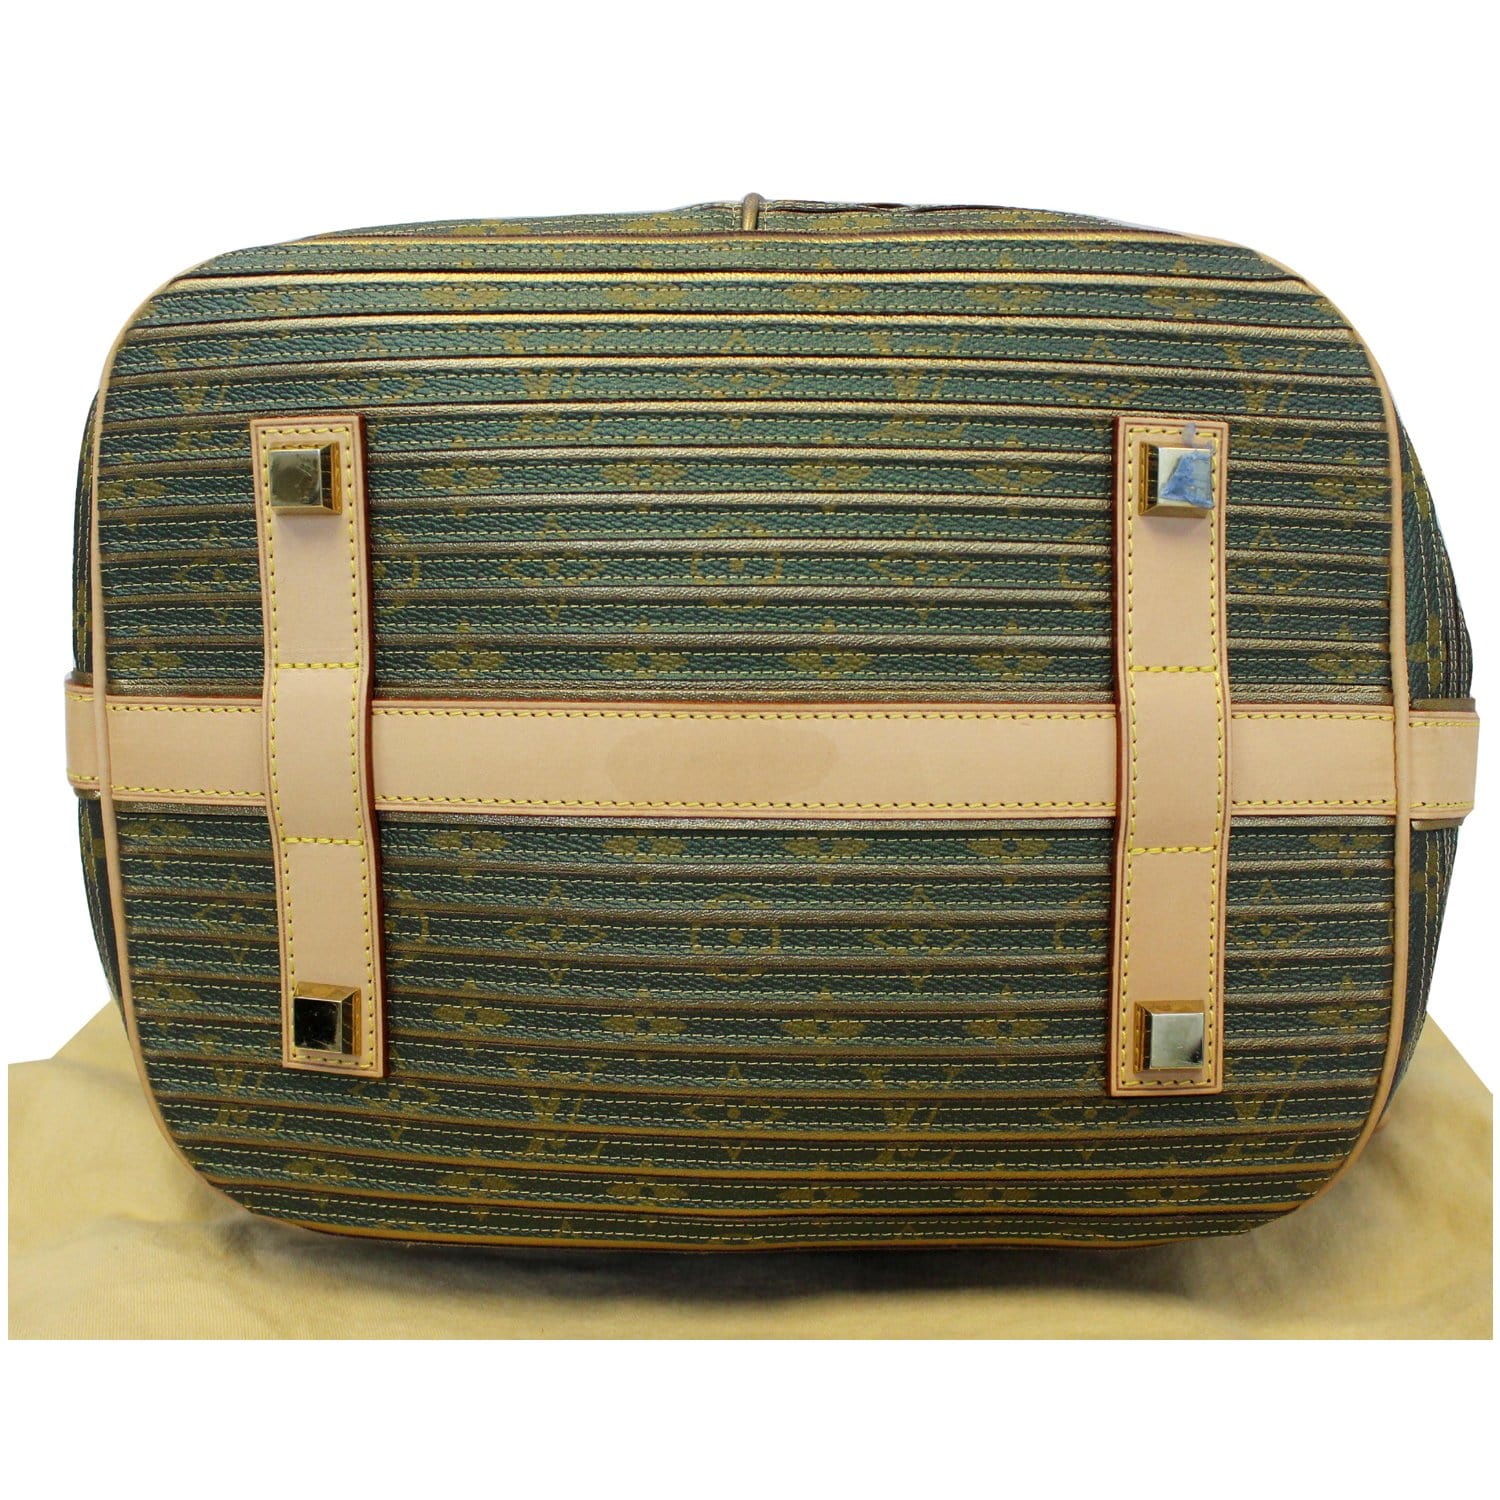 1970s Louis Vuitton Doctor Bag. Vintage patina - price reflected